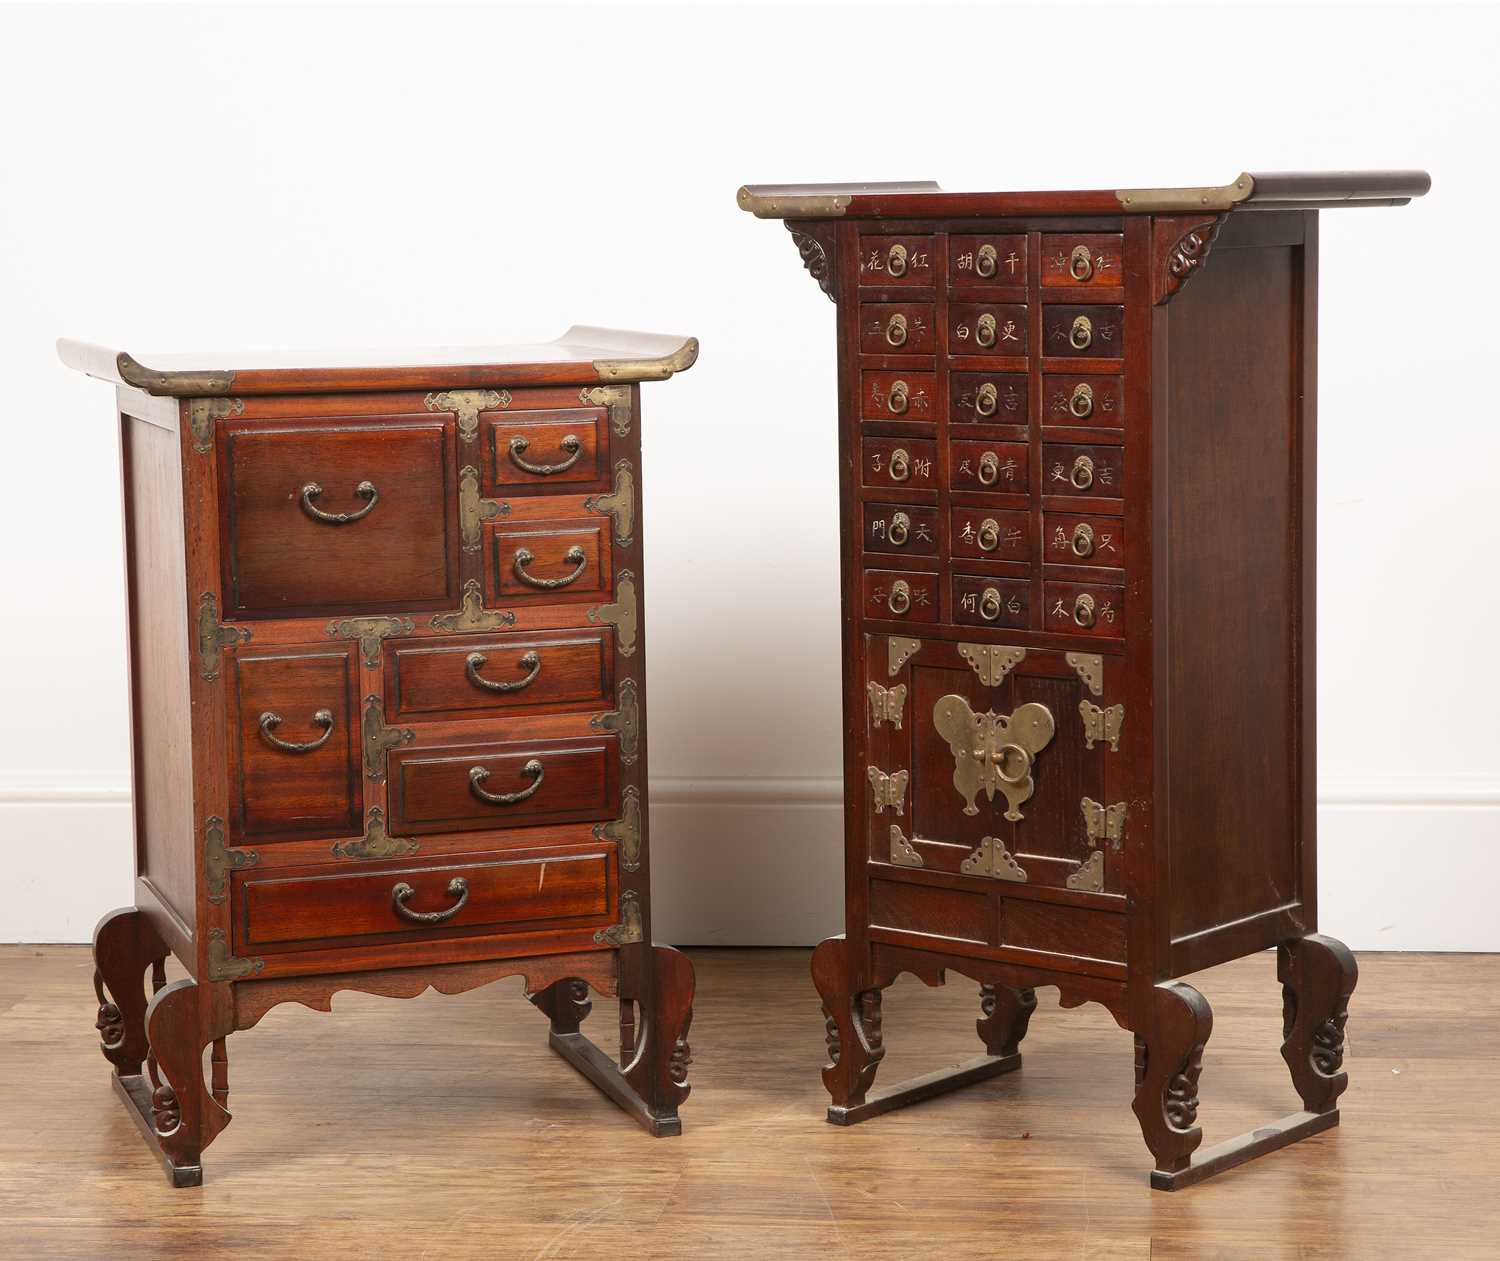 Two small sets of drawers Chinese, one 47cm wide x 75cm high x 25cm deep and the other 44.5cm wide x - Image 2 of 6